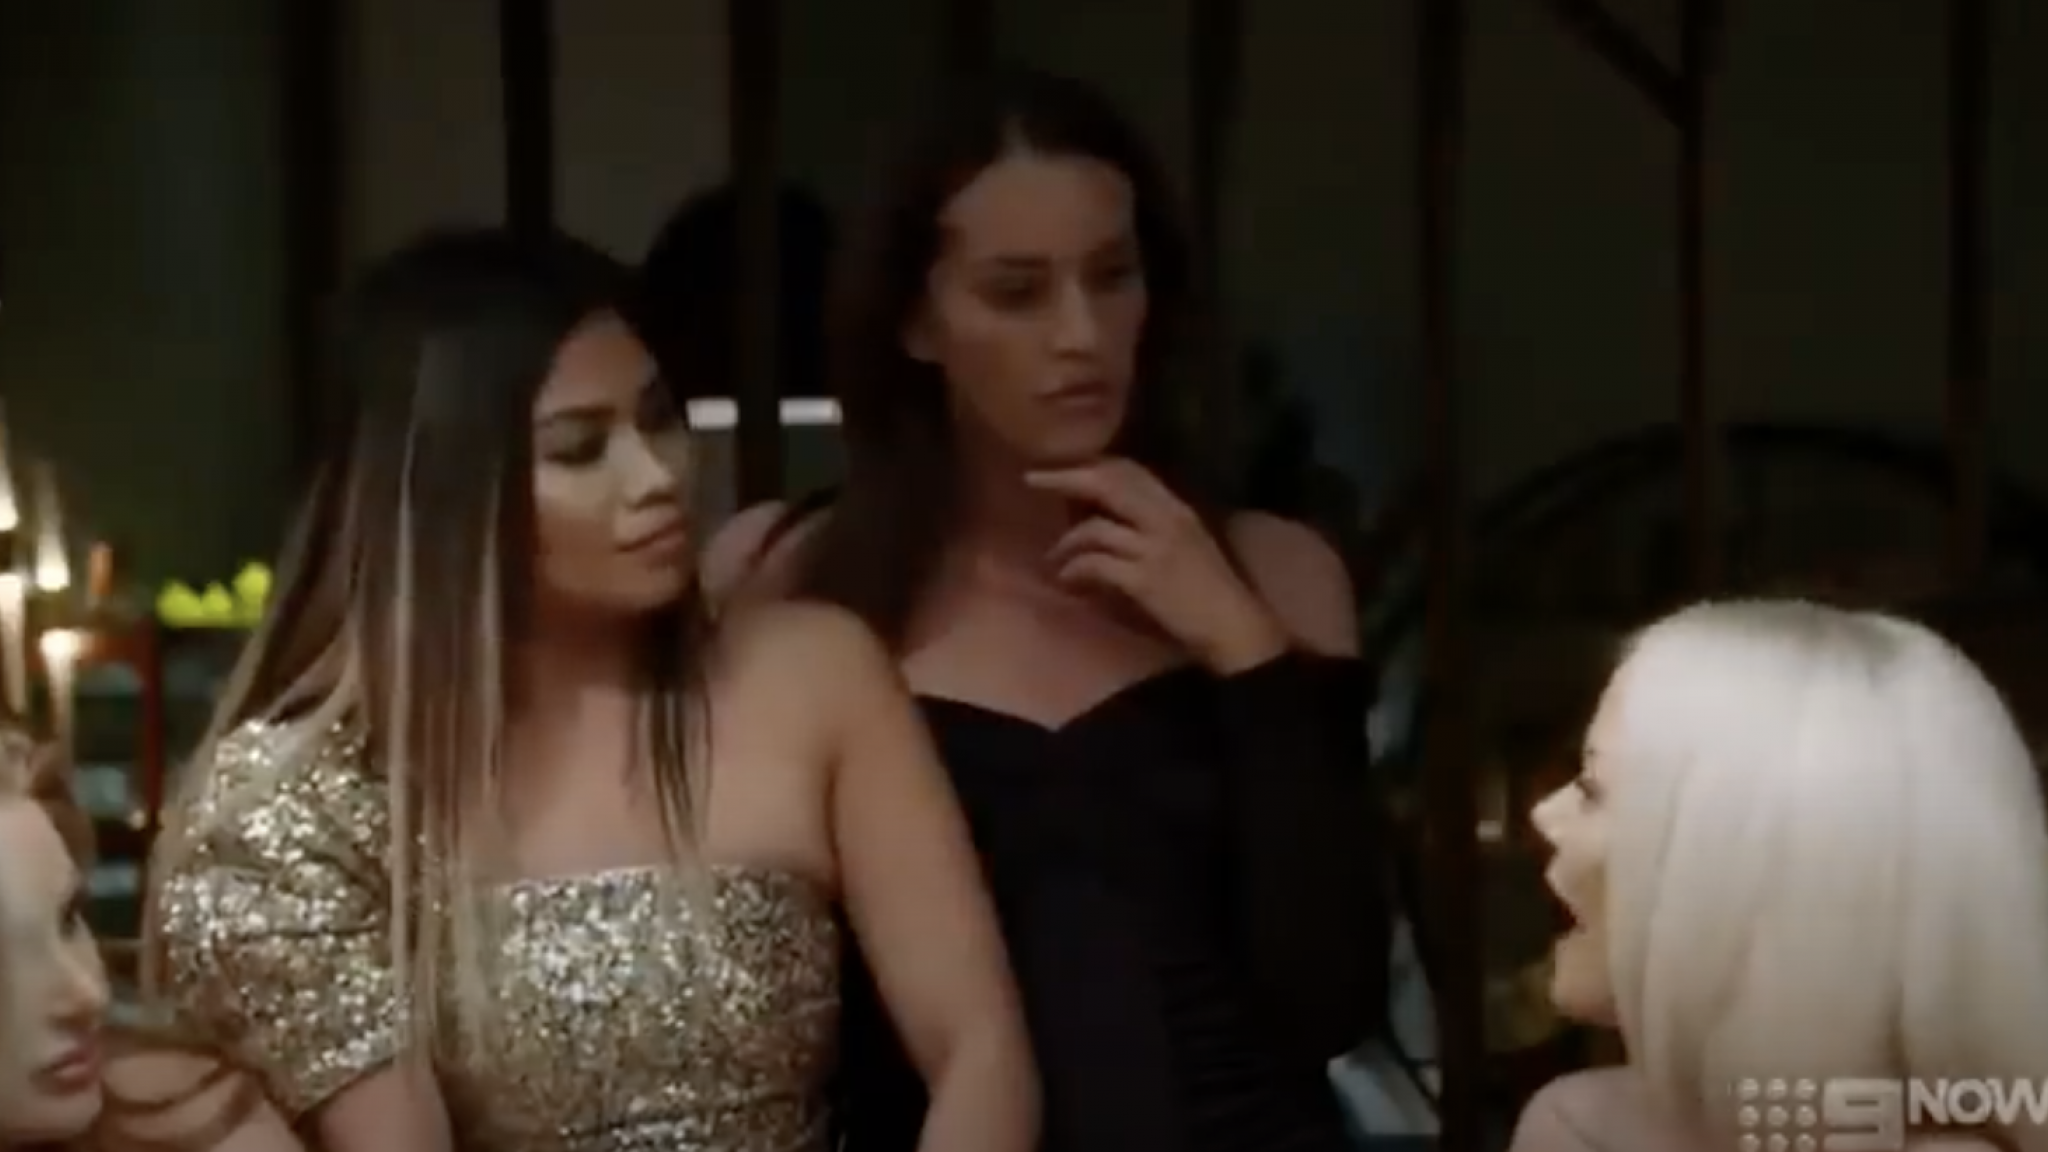 Reunion MAFS Australia is totally out of control